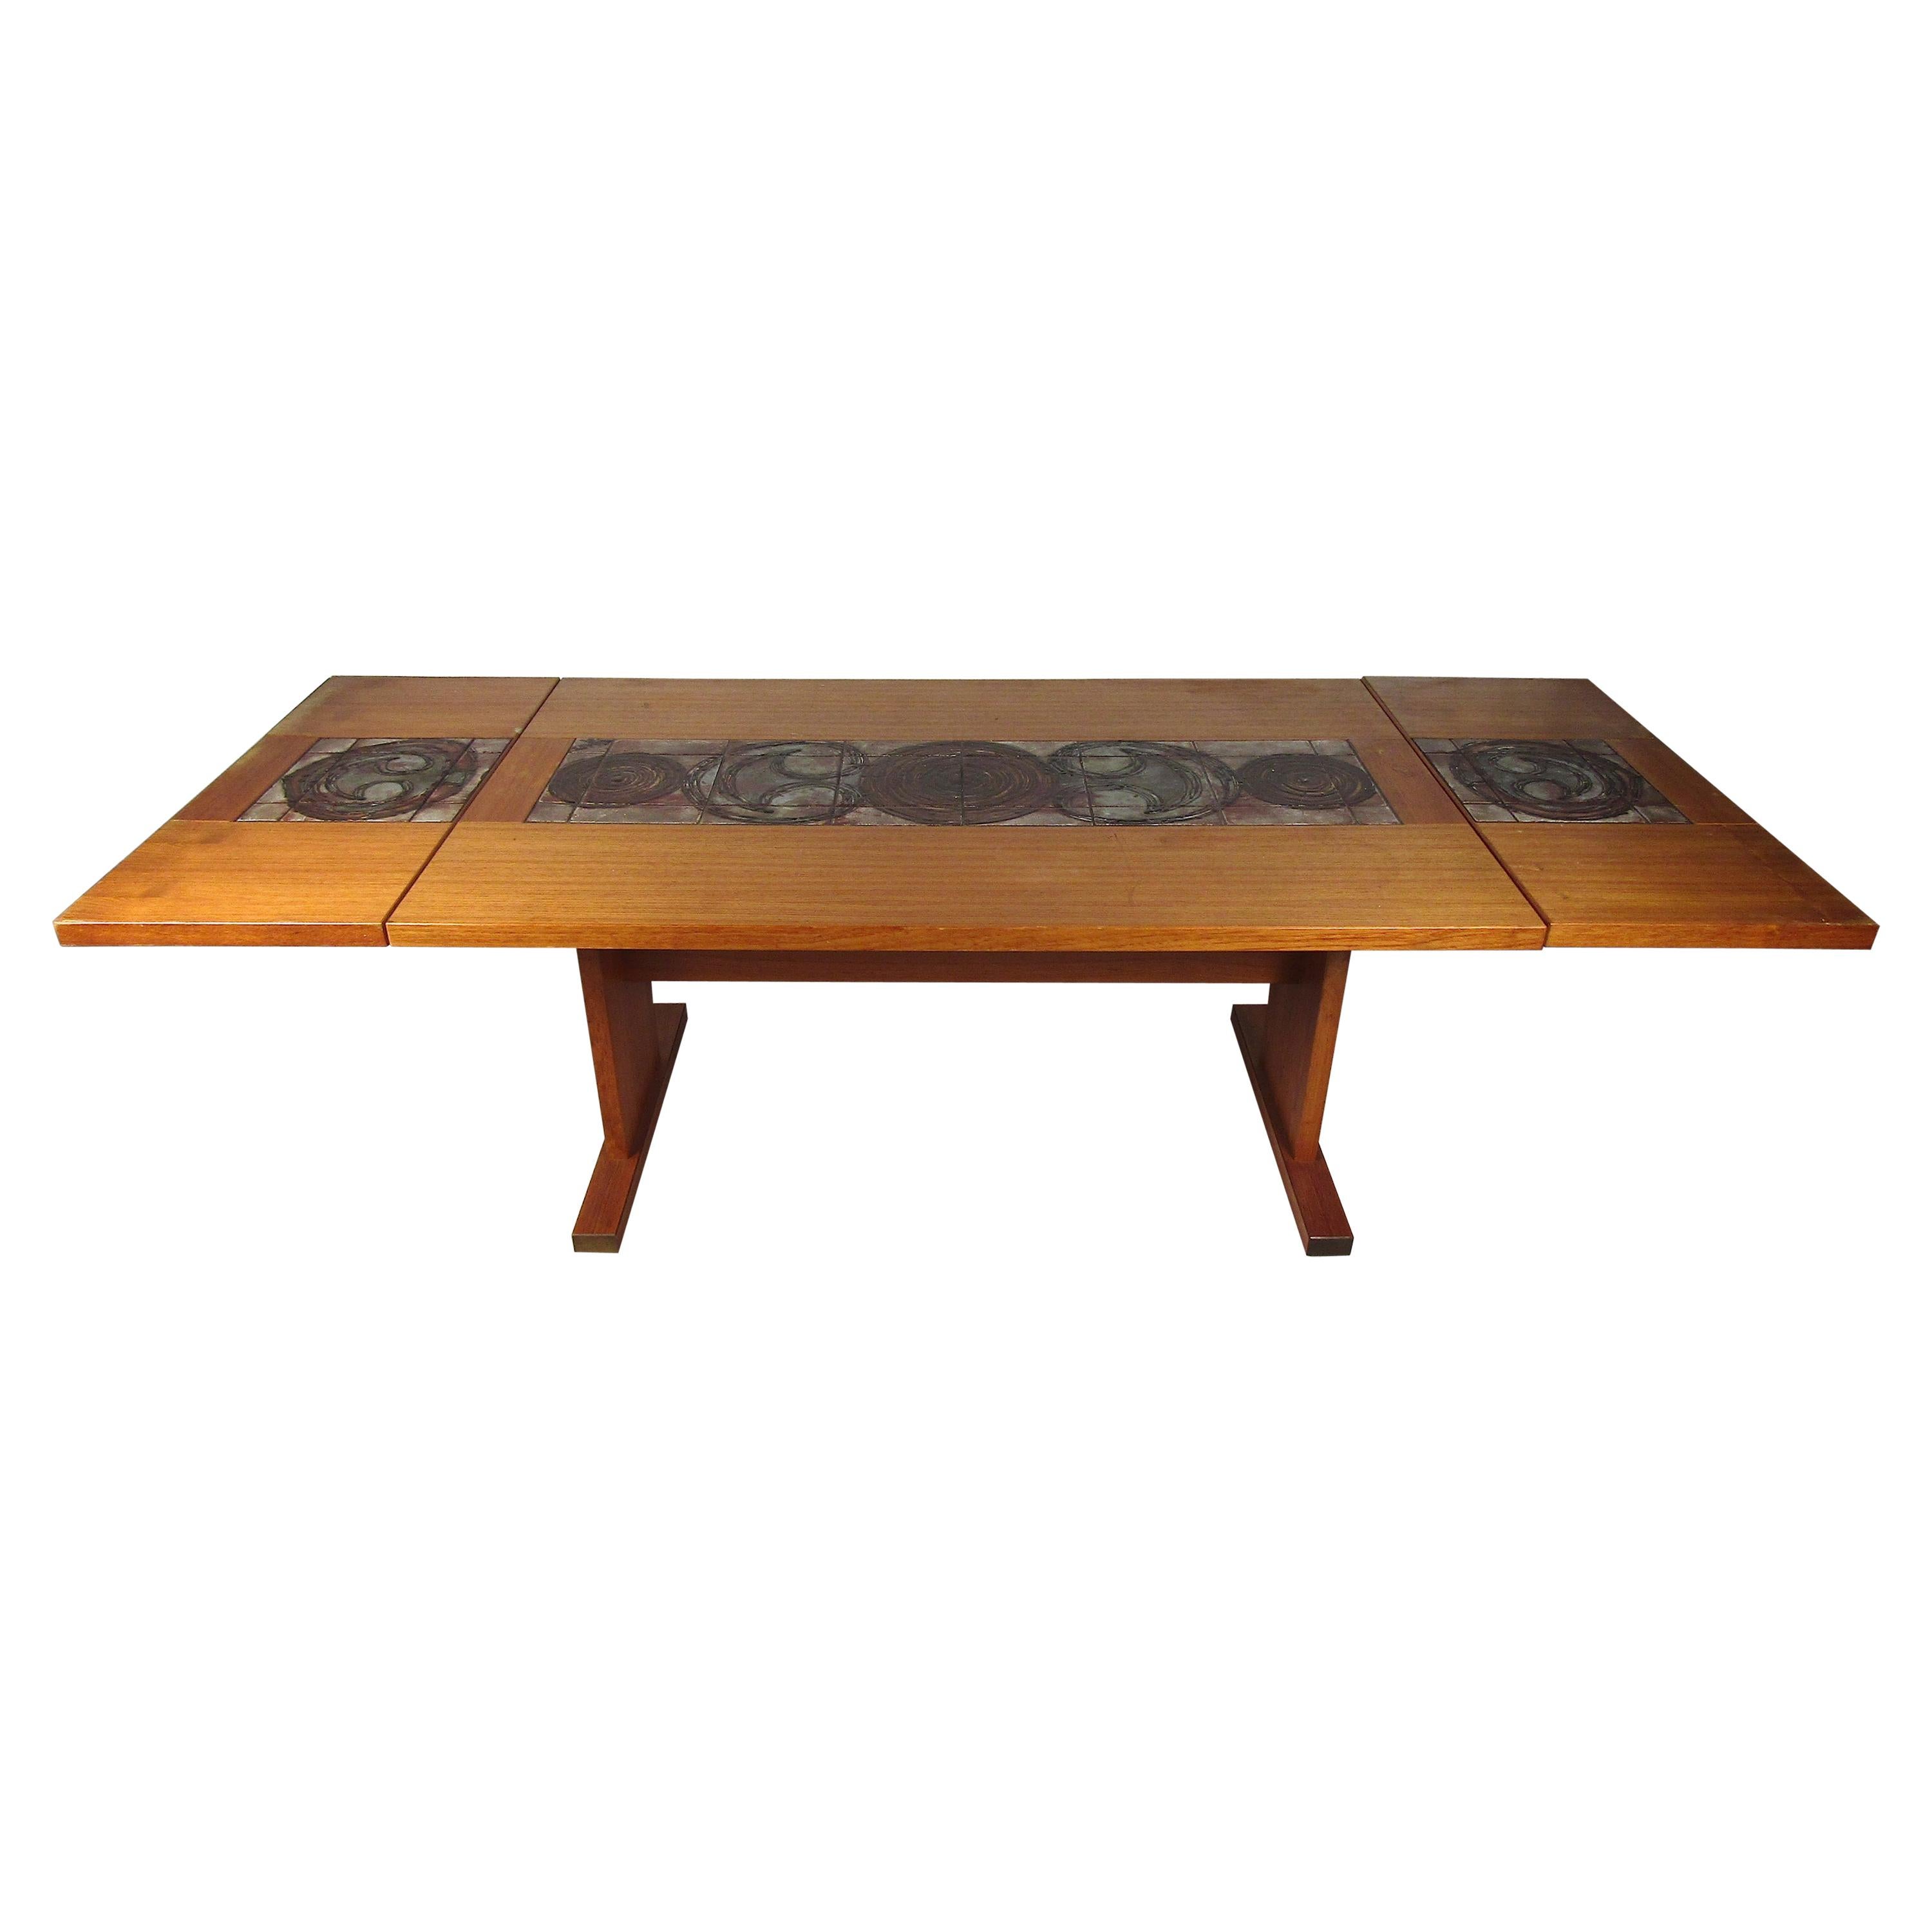 Danish Modern Drop-Leaf Dining Table with Tile Inlays For Sale